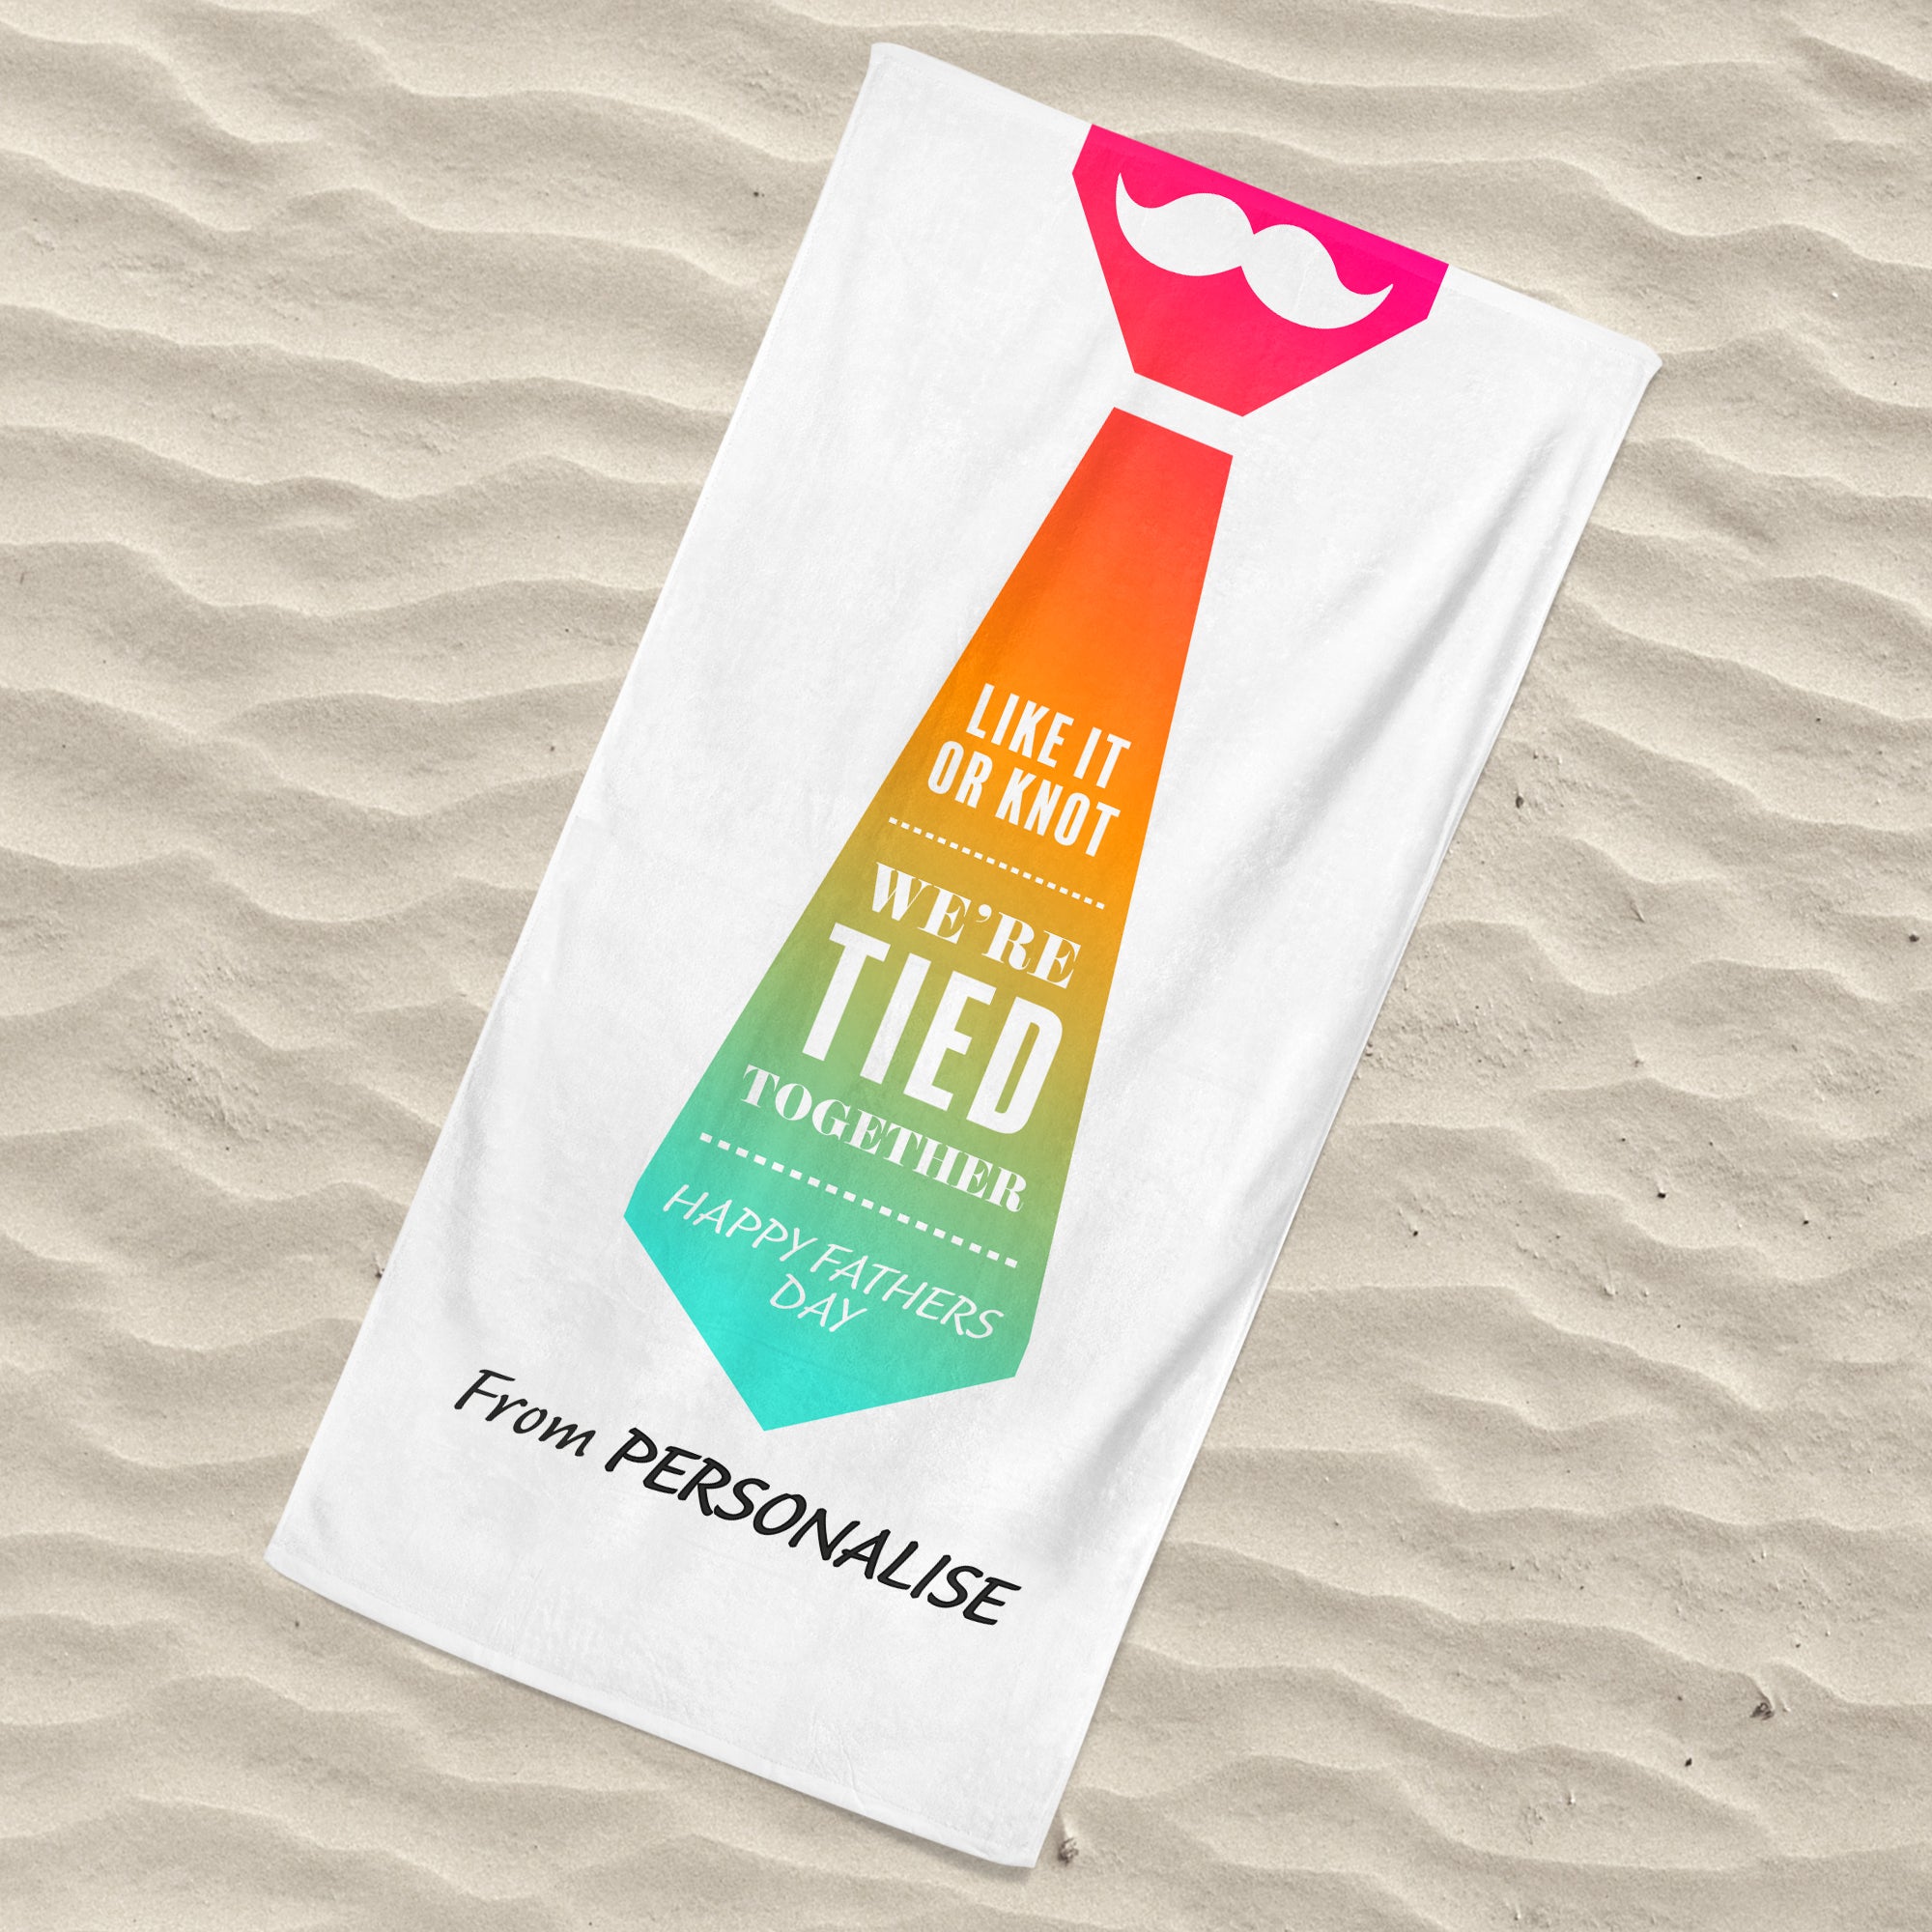 Beach Towel White with Gradient Tie - We're Tied Together - Personalise with Name